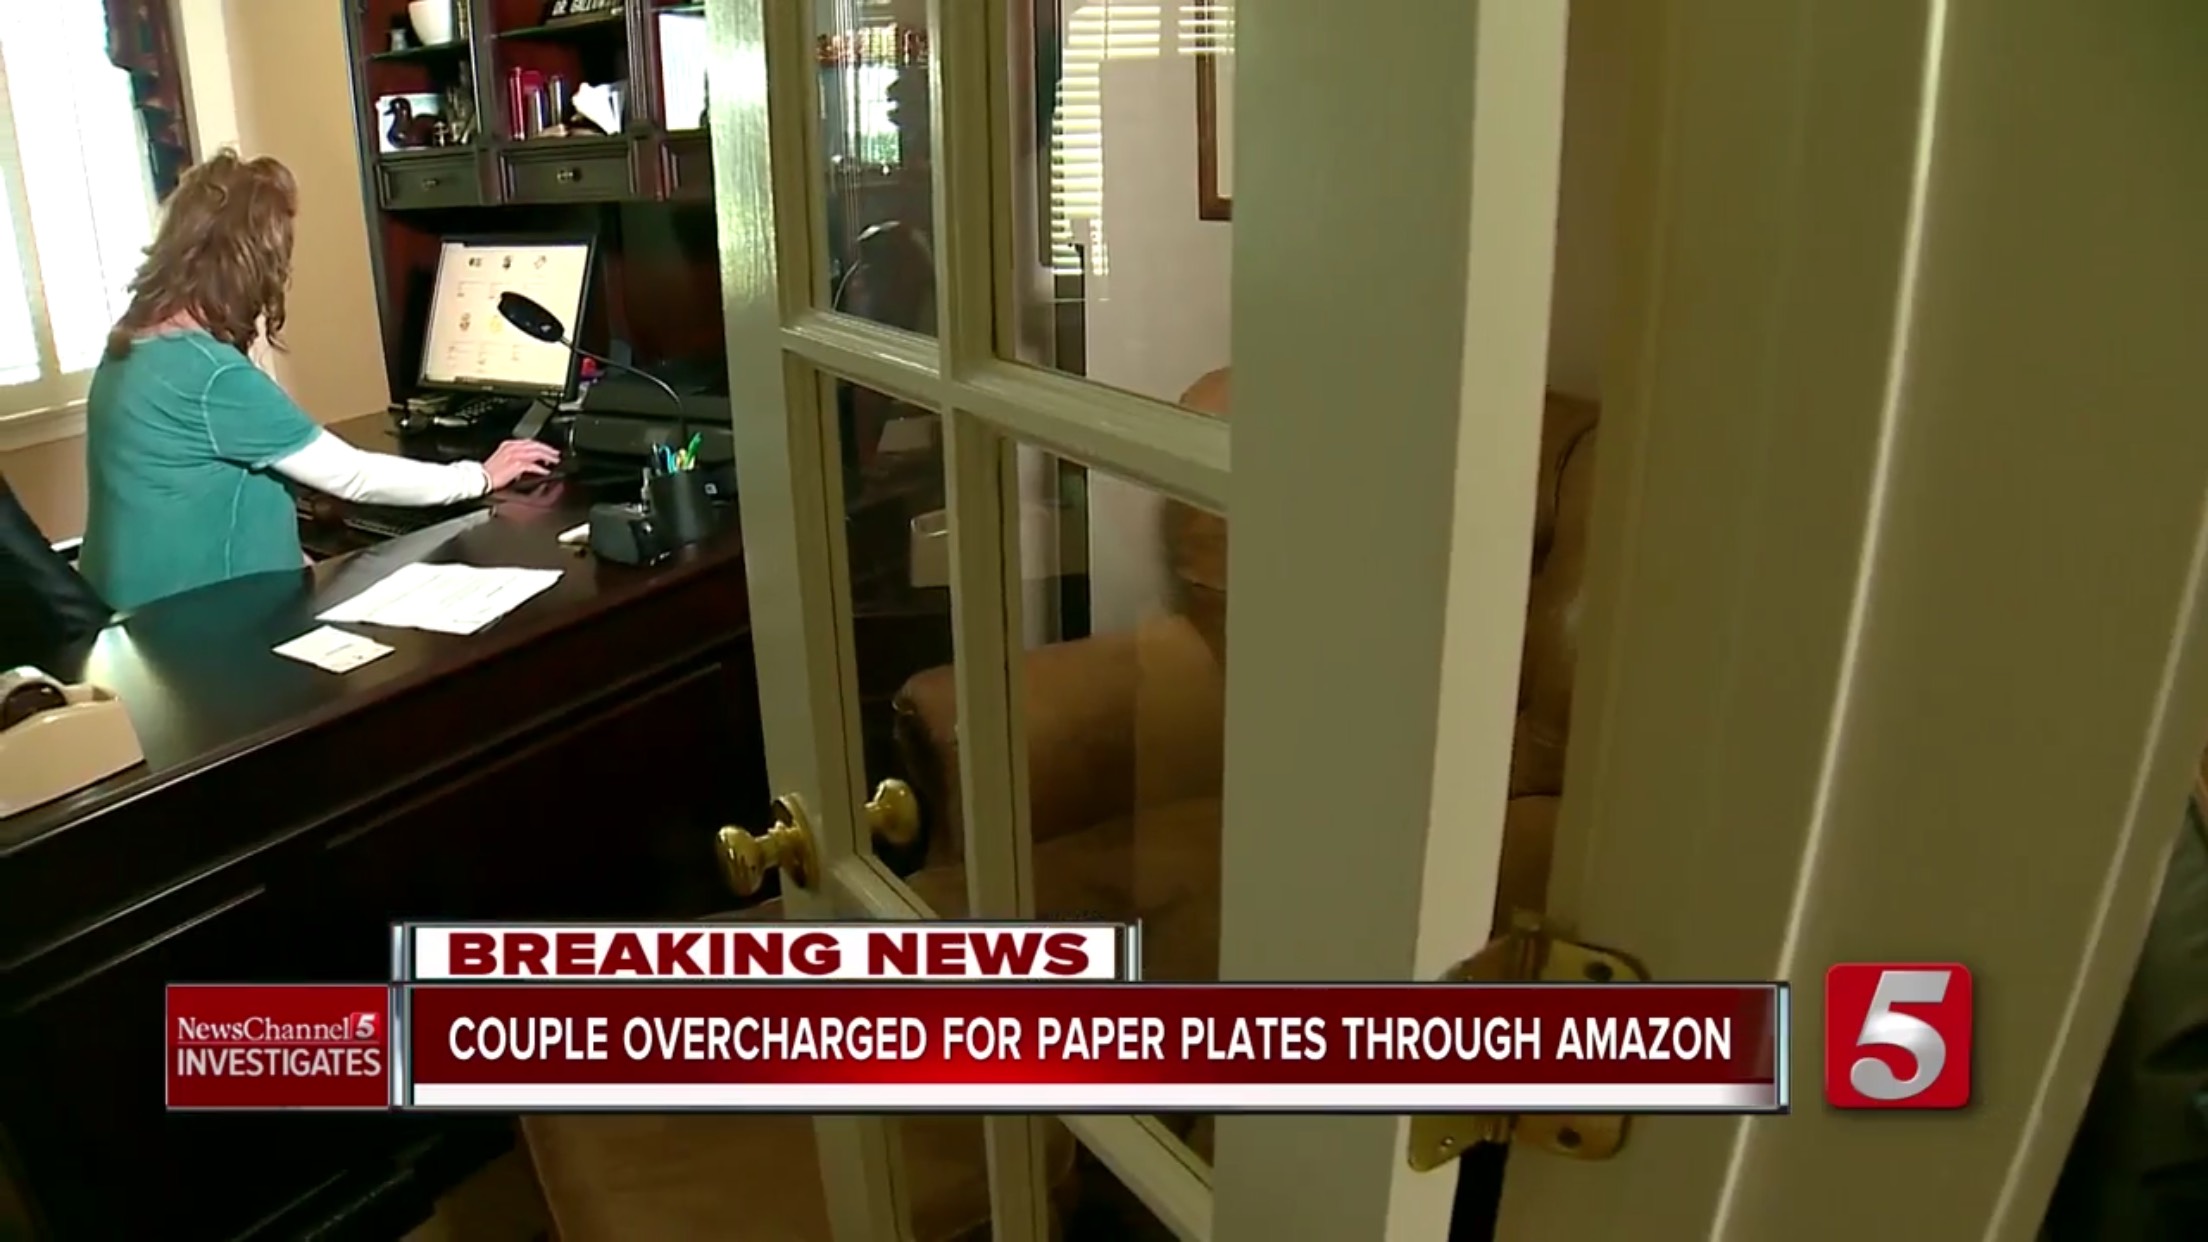 Couple Overcharged For Paper Plates Through Amazon